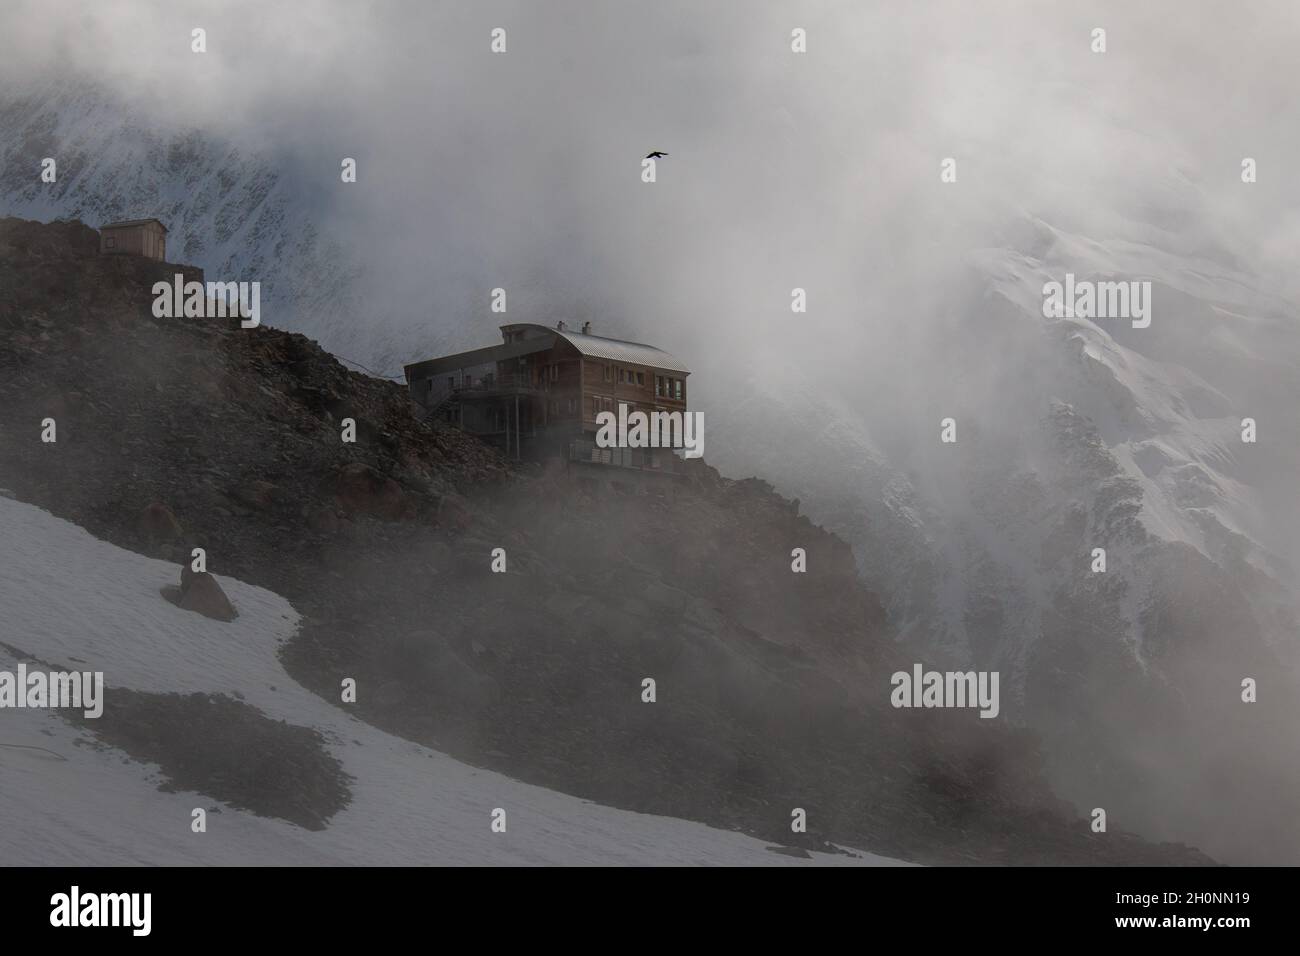 Refuge de Tete Rousse on one of the tops of the Massif du Mont Blanc, French Alps, France Stock Photo